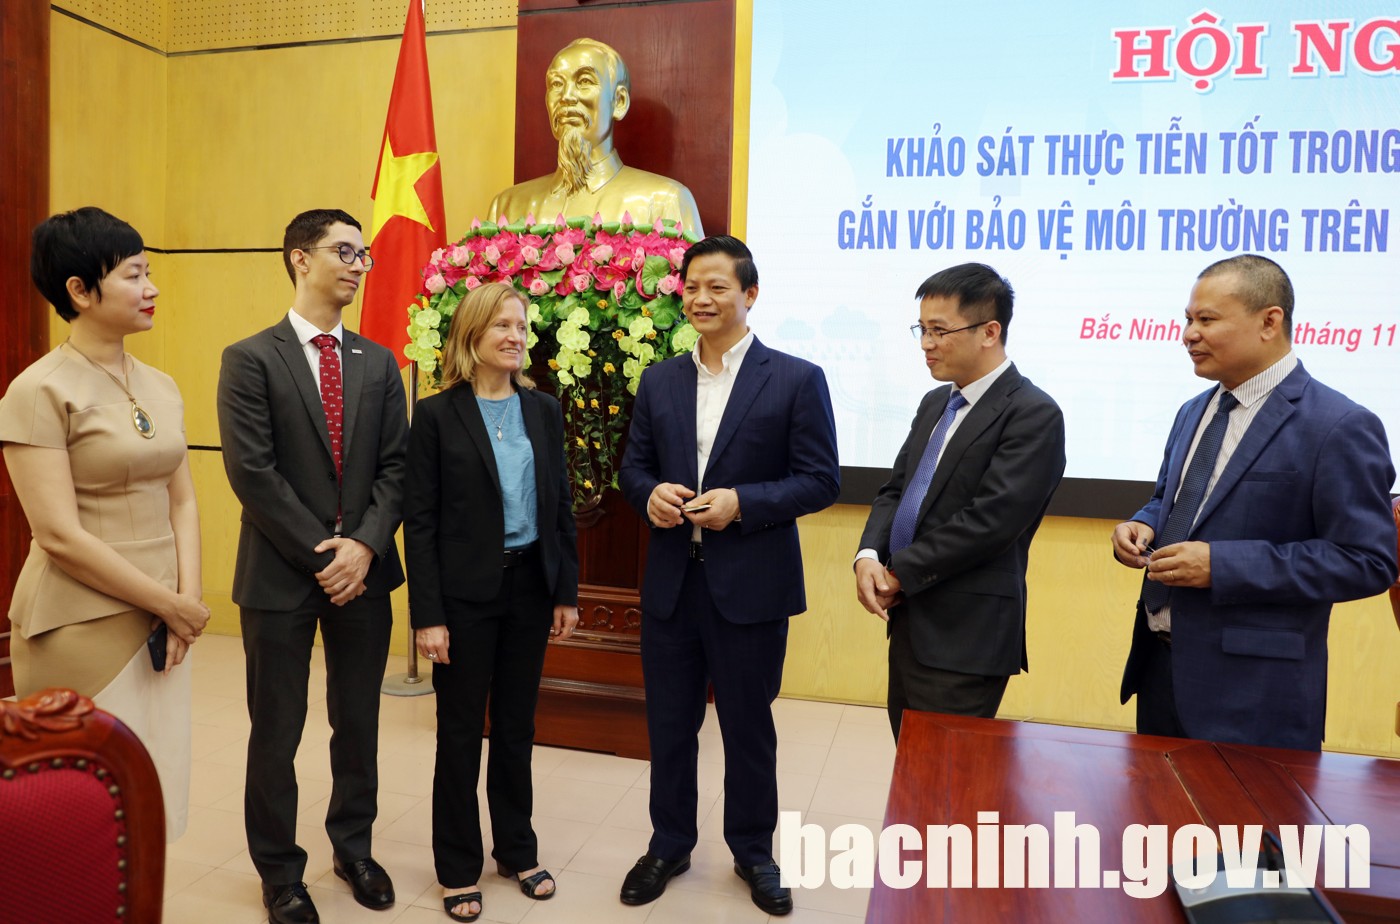 Vietnam Chamber of Commerce and Industry surveys in Bac Ninh